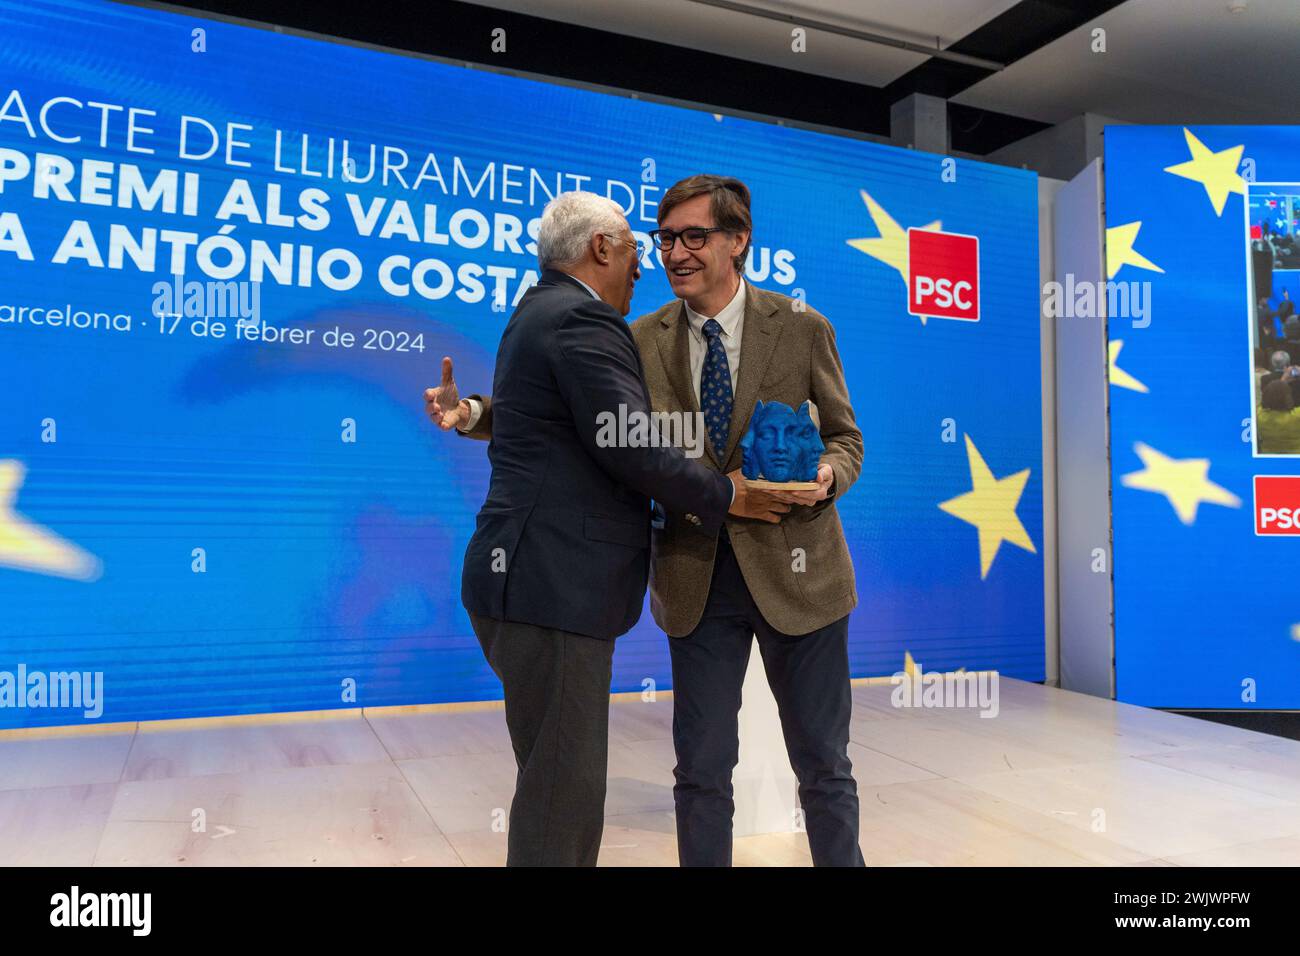 February, 17, 2024 Barcelona, SpainPolitics Barcelona-P.M. Costa Receives European Prize The Partit Socialista de Catalunya (PSC) awards the European Values Prize to Antonio Costa, the current acting Prime Minister of Portugal. Costa, who announced early elections in Portugal for March 10th, was touched by a report from the Portuguese prosecutor's office regarding a lithium mine and a corruption scandal. During the event, the Secretary-General of the PSC, Salvador Illa, presented him with the award. El Partit Socialista de Catalunya (PSC) entrega el Premio a los Valores Europeos a Antonio Cos Stock Photo